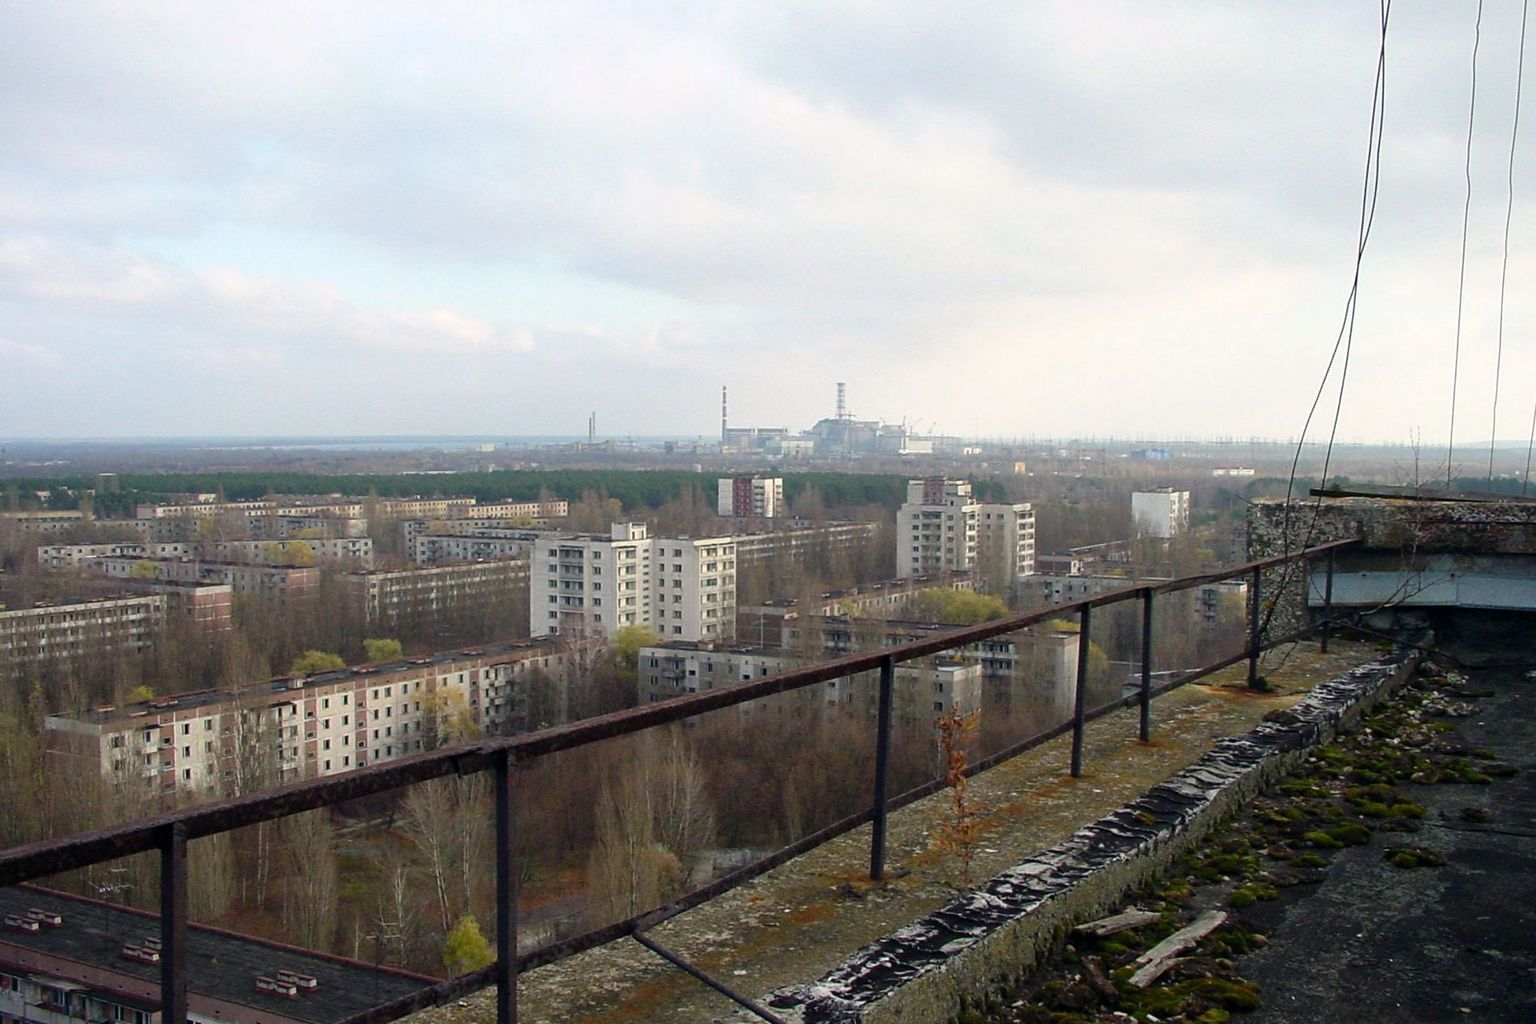 View of Chernobyl power plant taken from roof of building in Pripyat Ukraine.